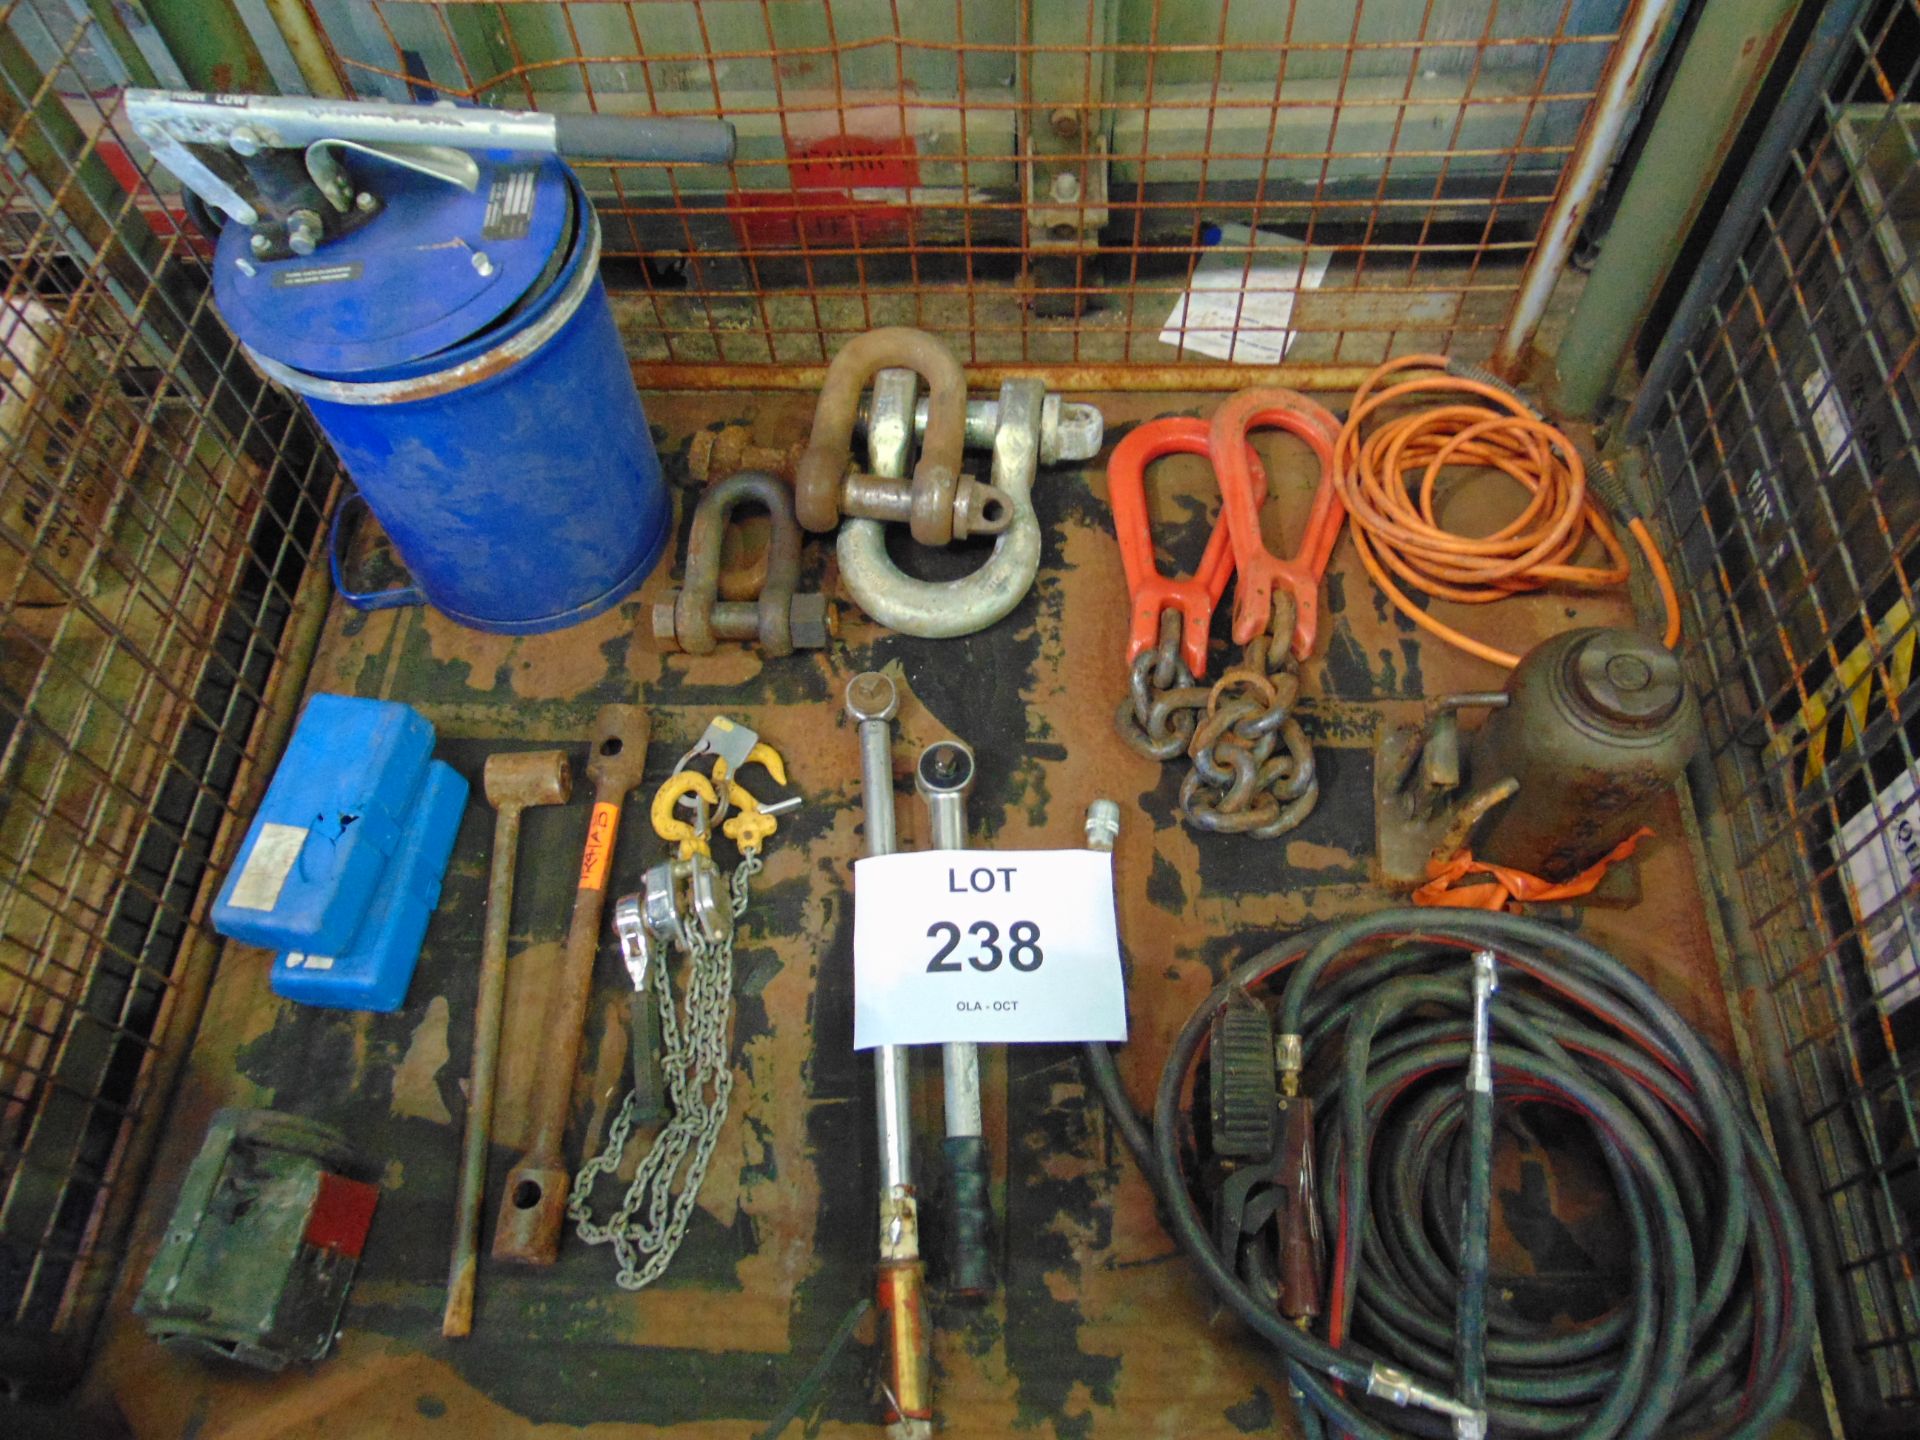 1X STILLAGE OF RECOVERY EQUIPMENT TOOLS GREASE GUN ETC